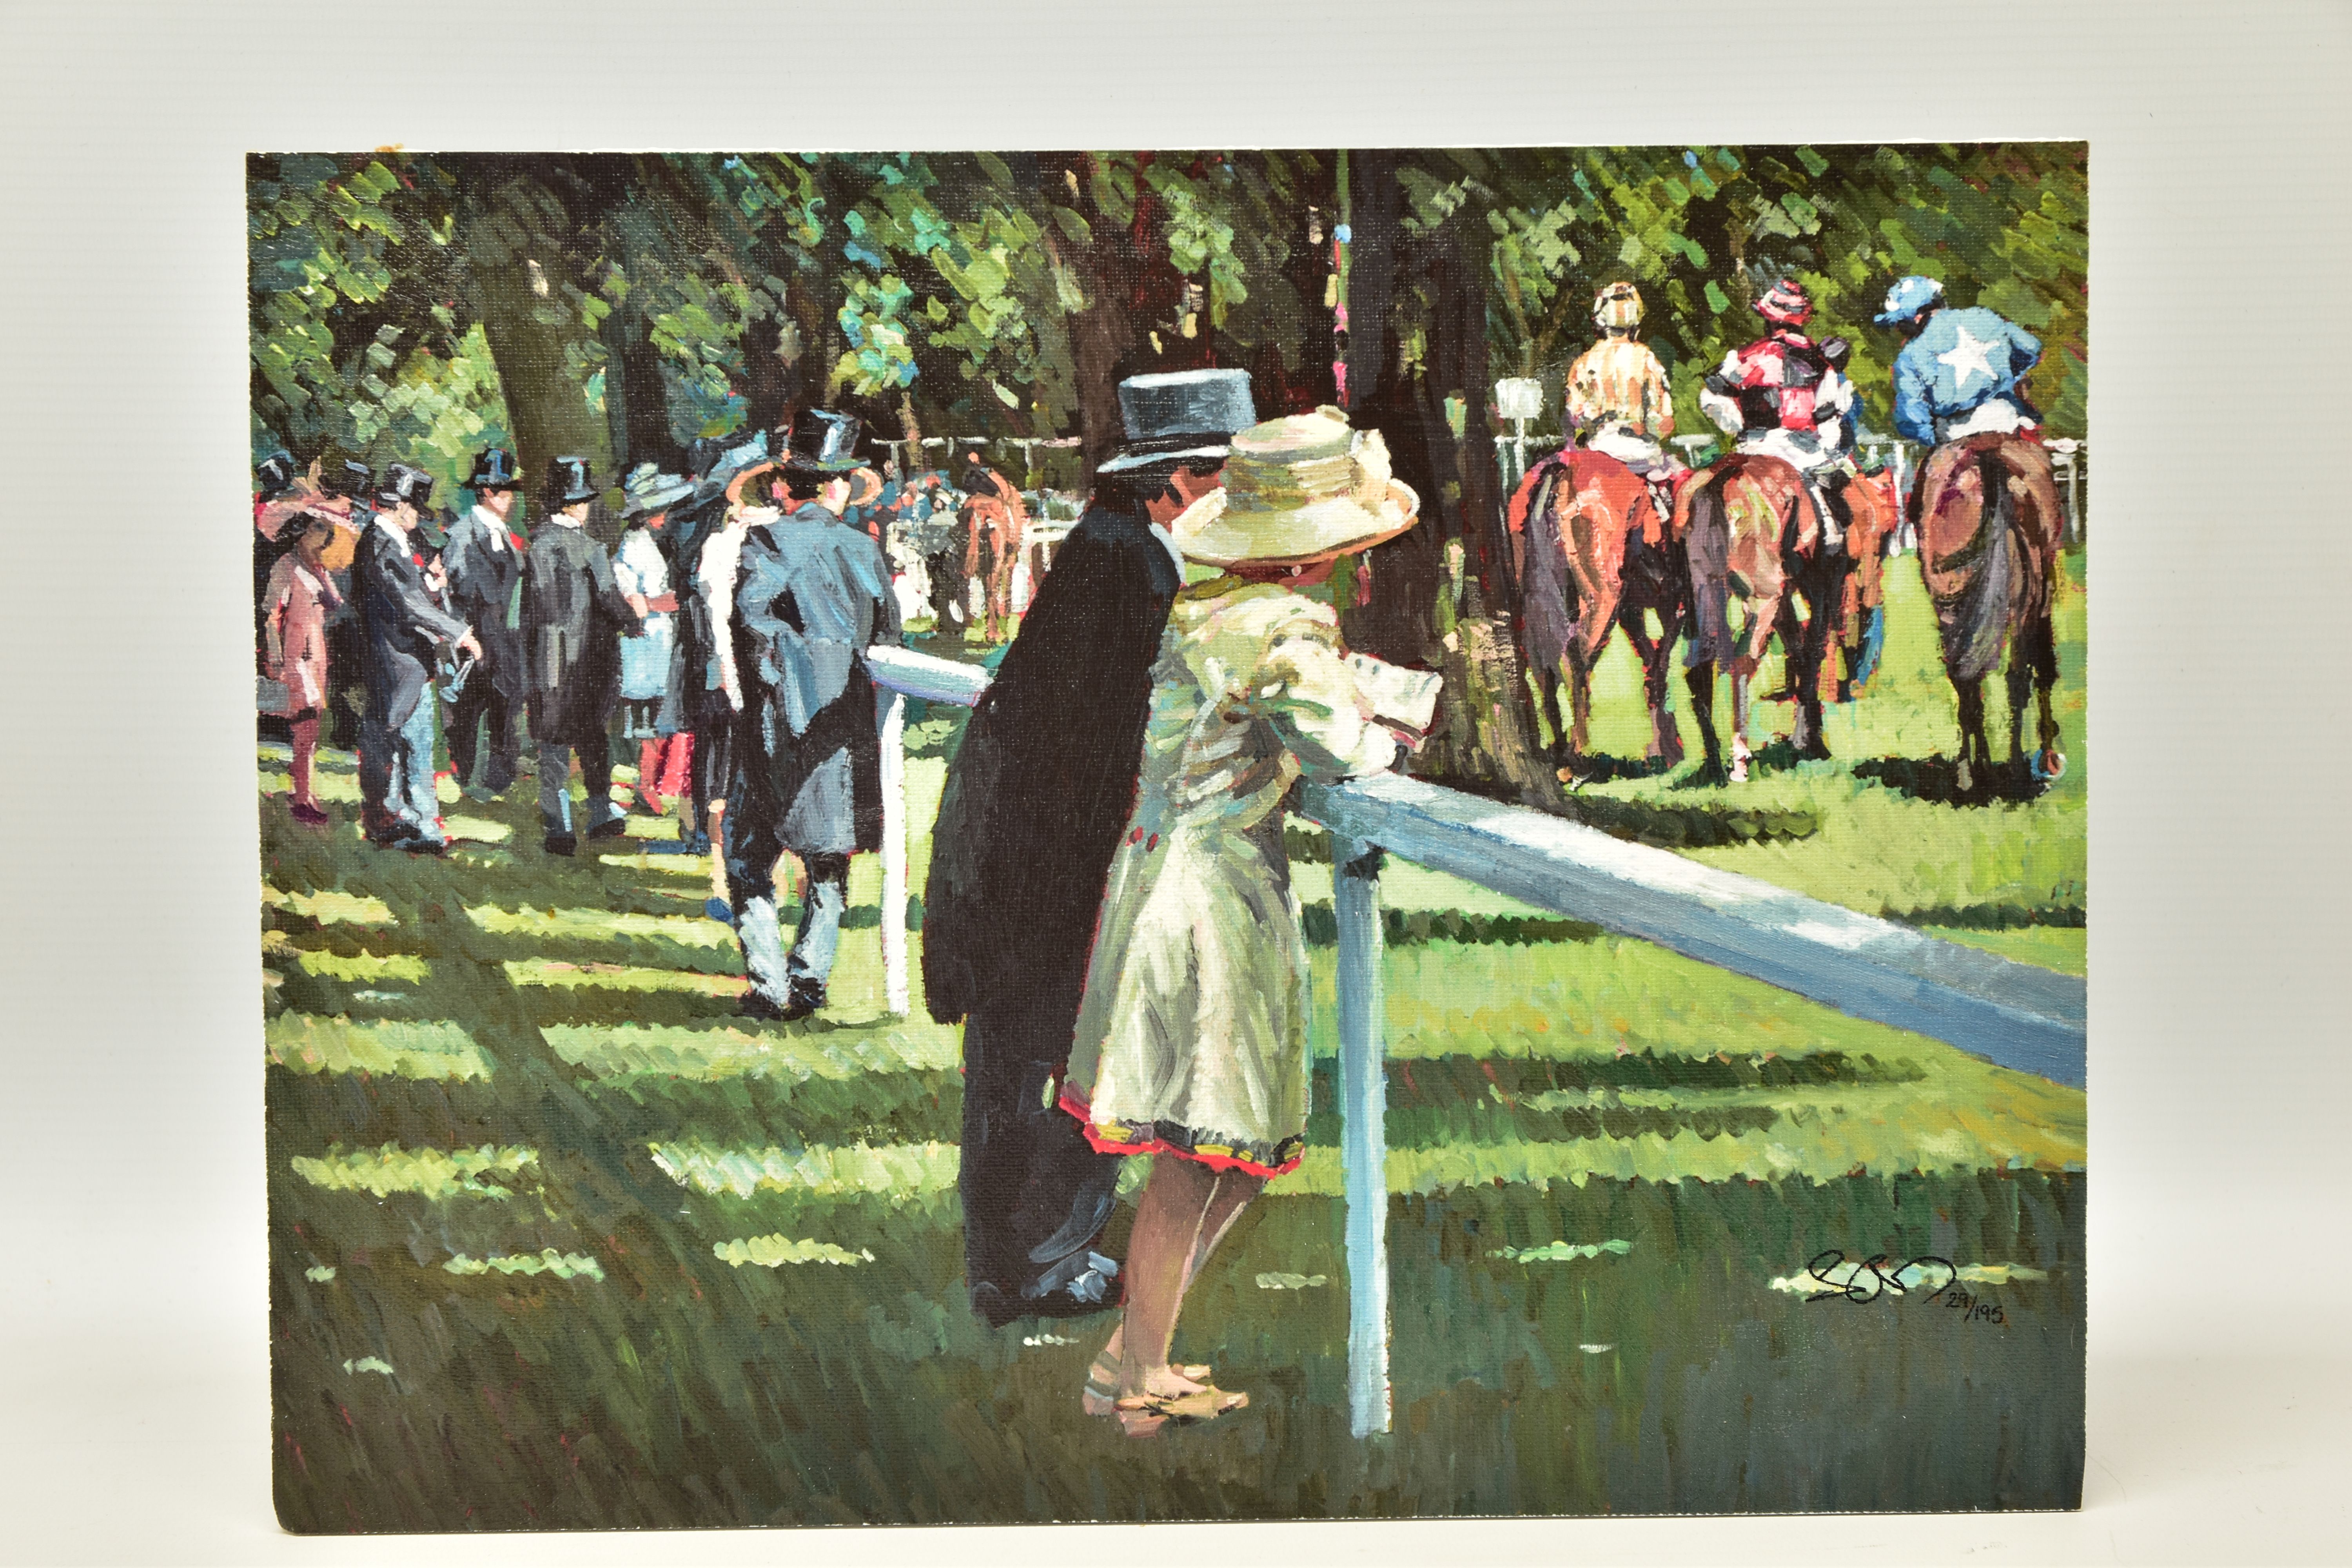 SHERREE VALENTINE DAINES (BRITISH 1959) 'ON PARADE', a signed limited edition print depicting